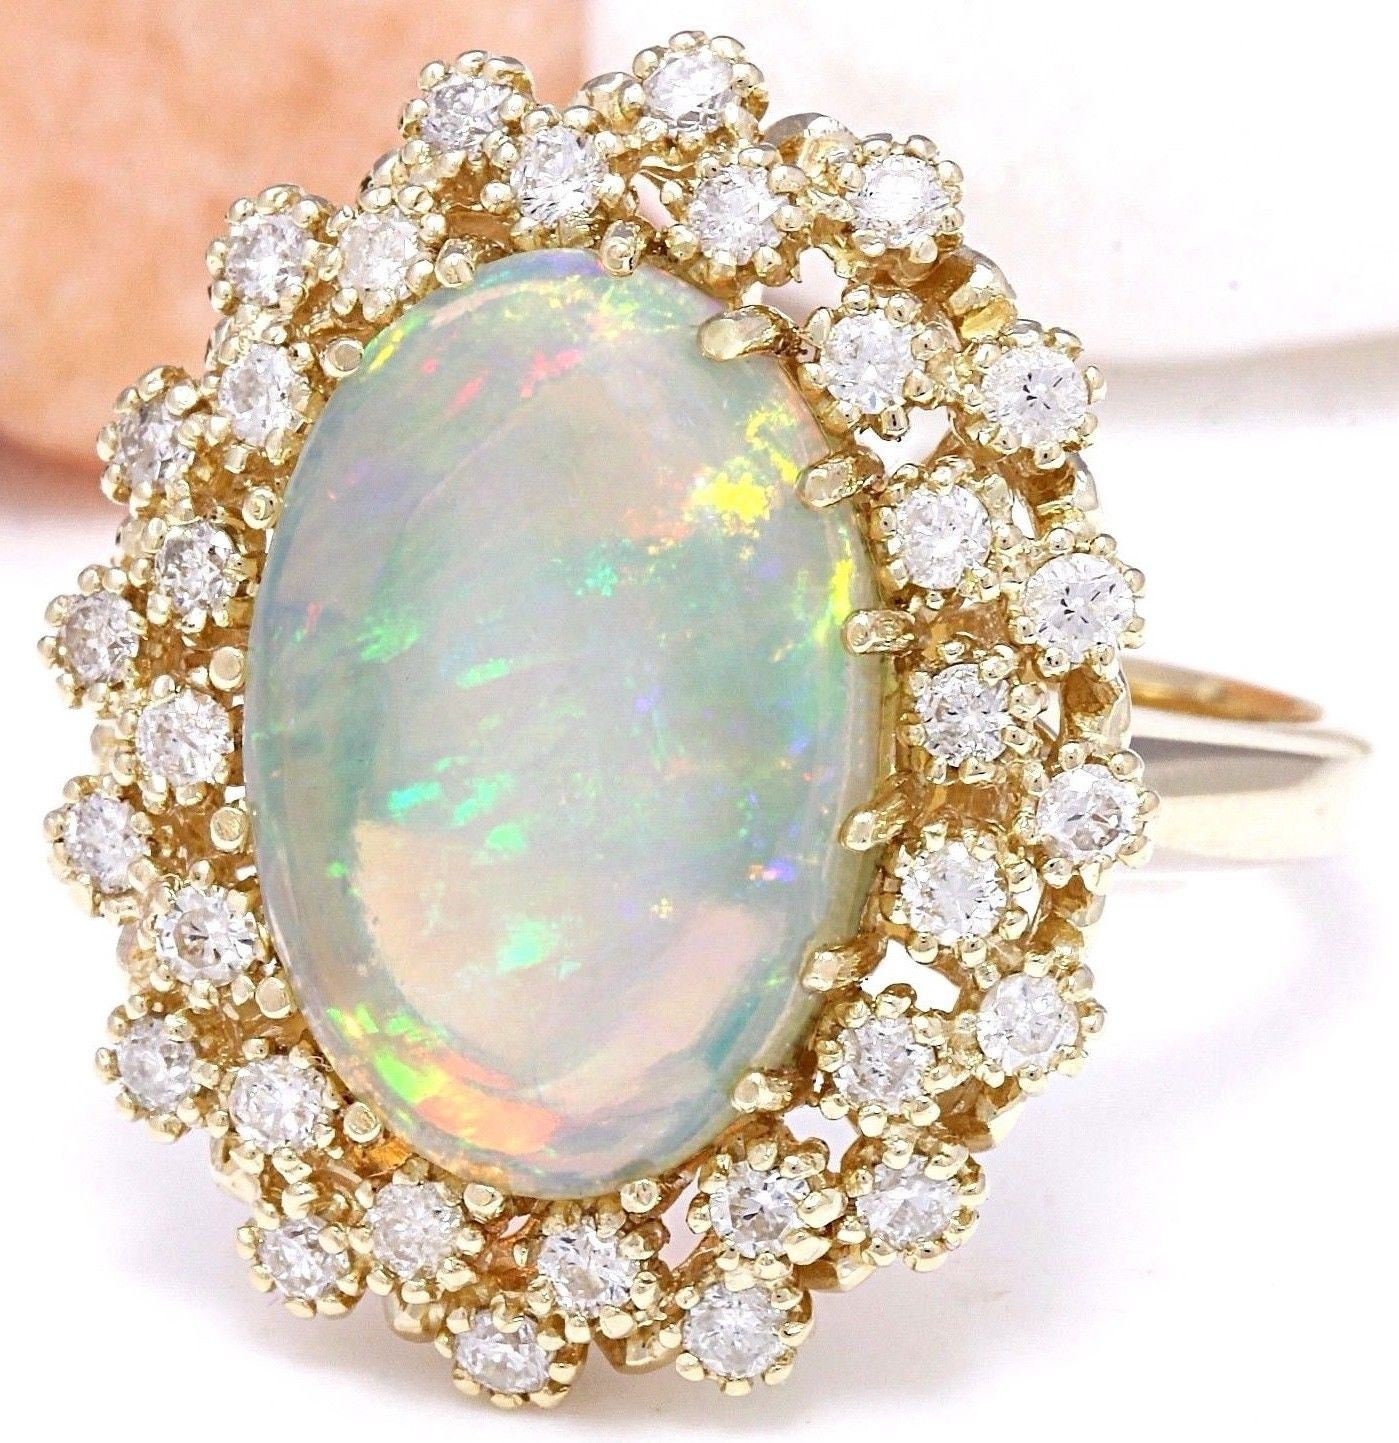 Opal and Diamond Ring in 14k Yellow Gold - Etsy